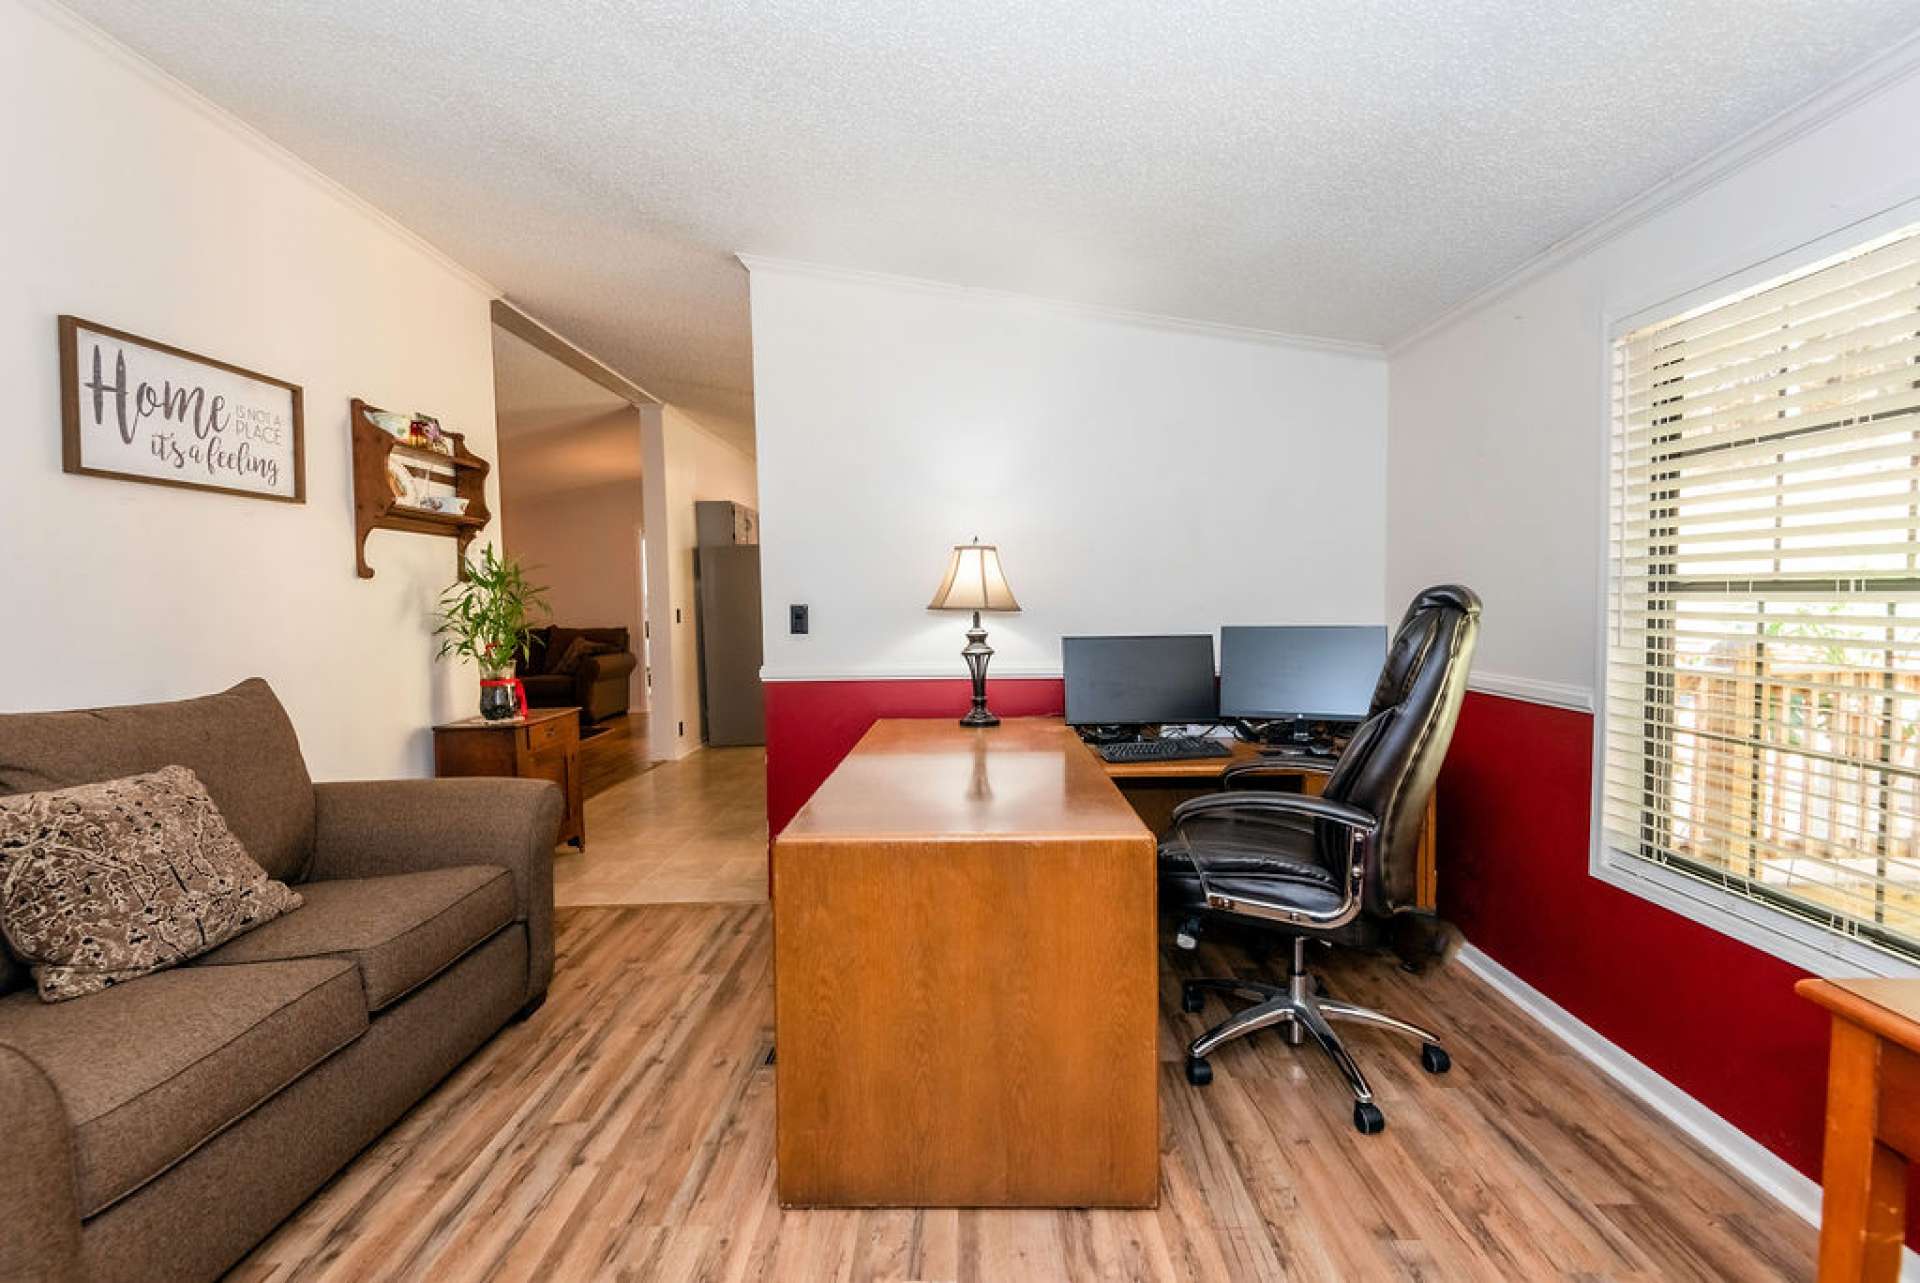 This bonus room is currently used as an office.